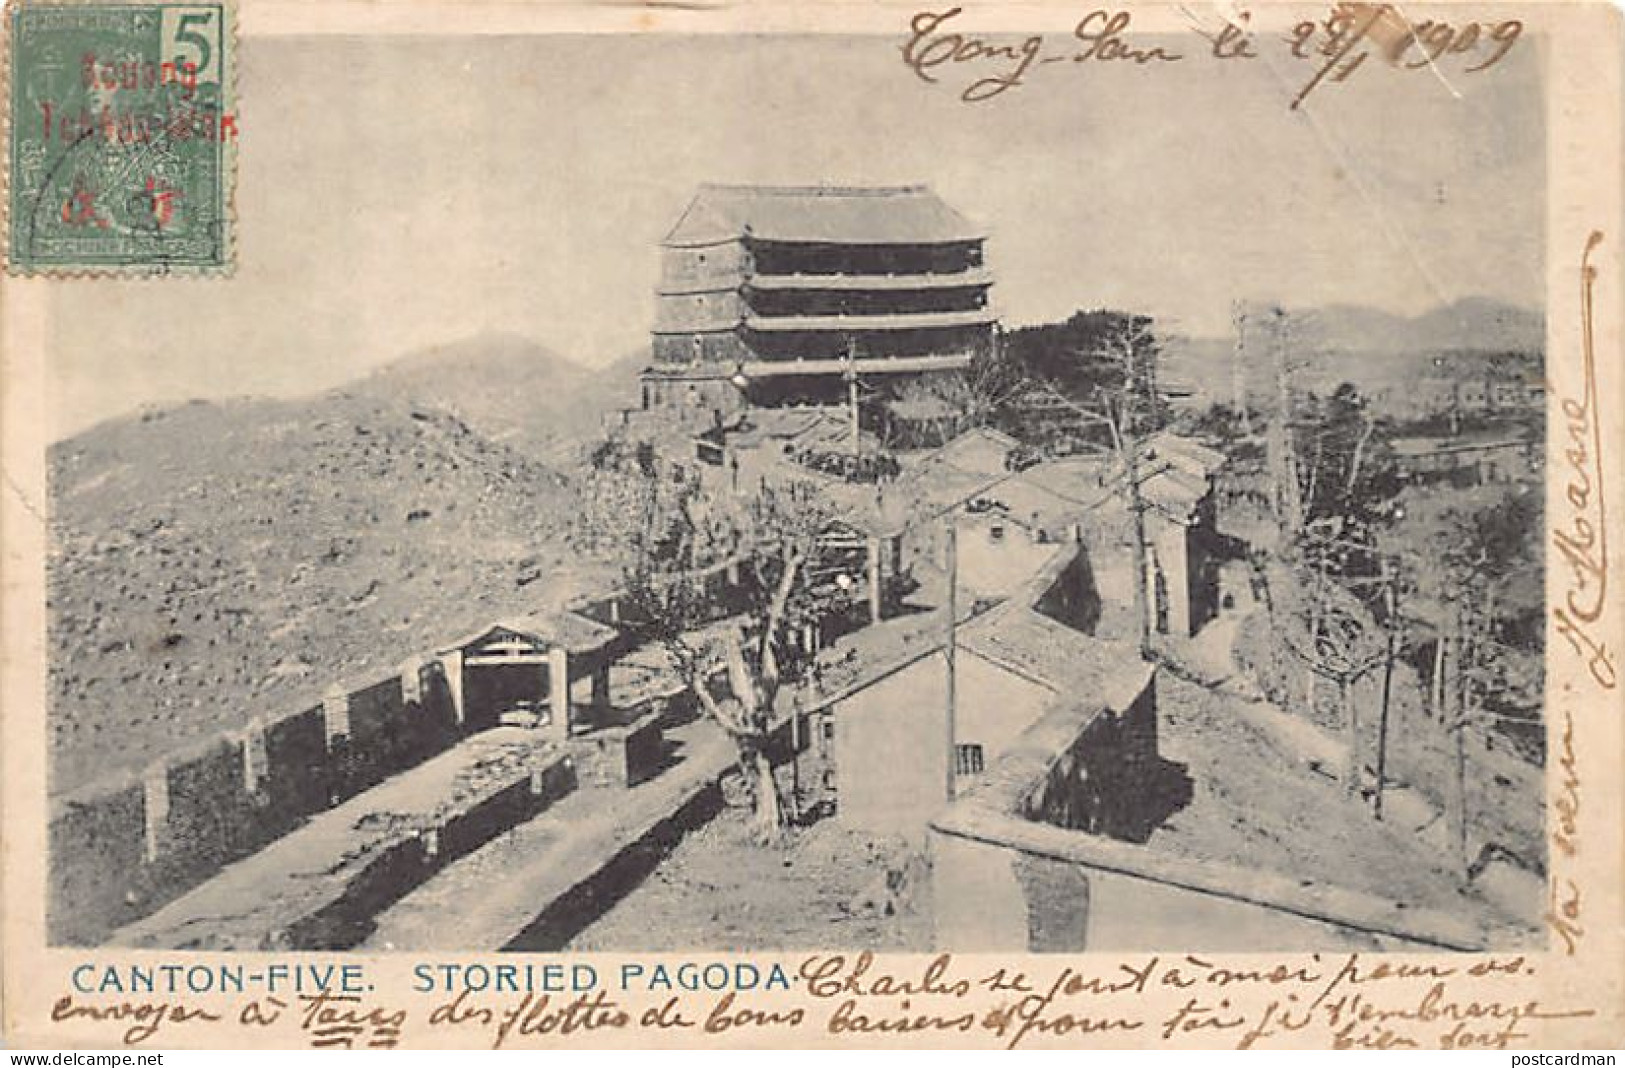 China - GUANGZHOU Canton - Fose Storied Pagoda - POSTCARD IS LIGHTLY UNSTICKED - Publ. Hongkong Pictorial Postcard Co.  - Chine